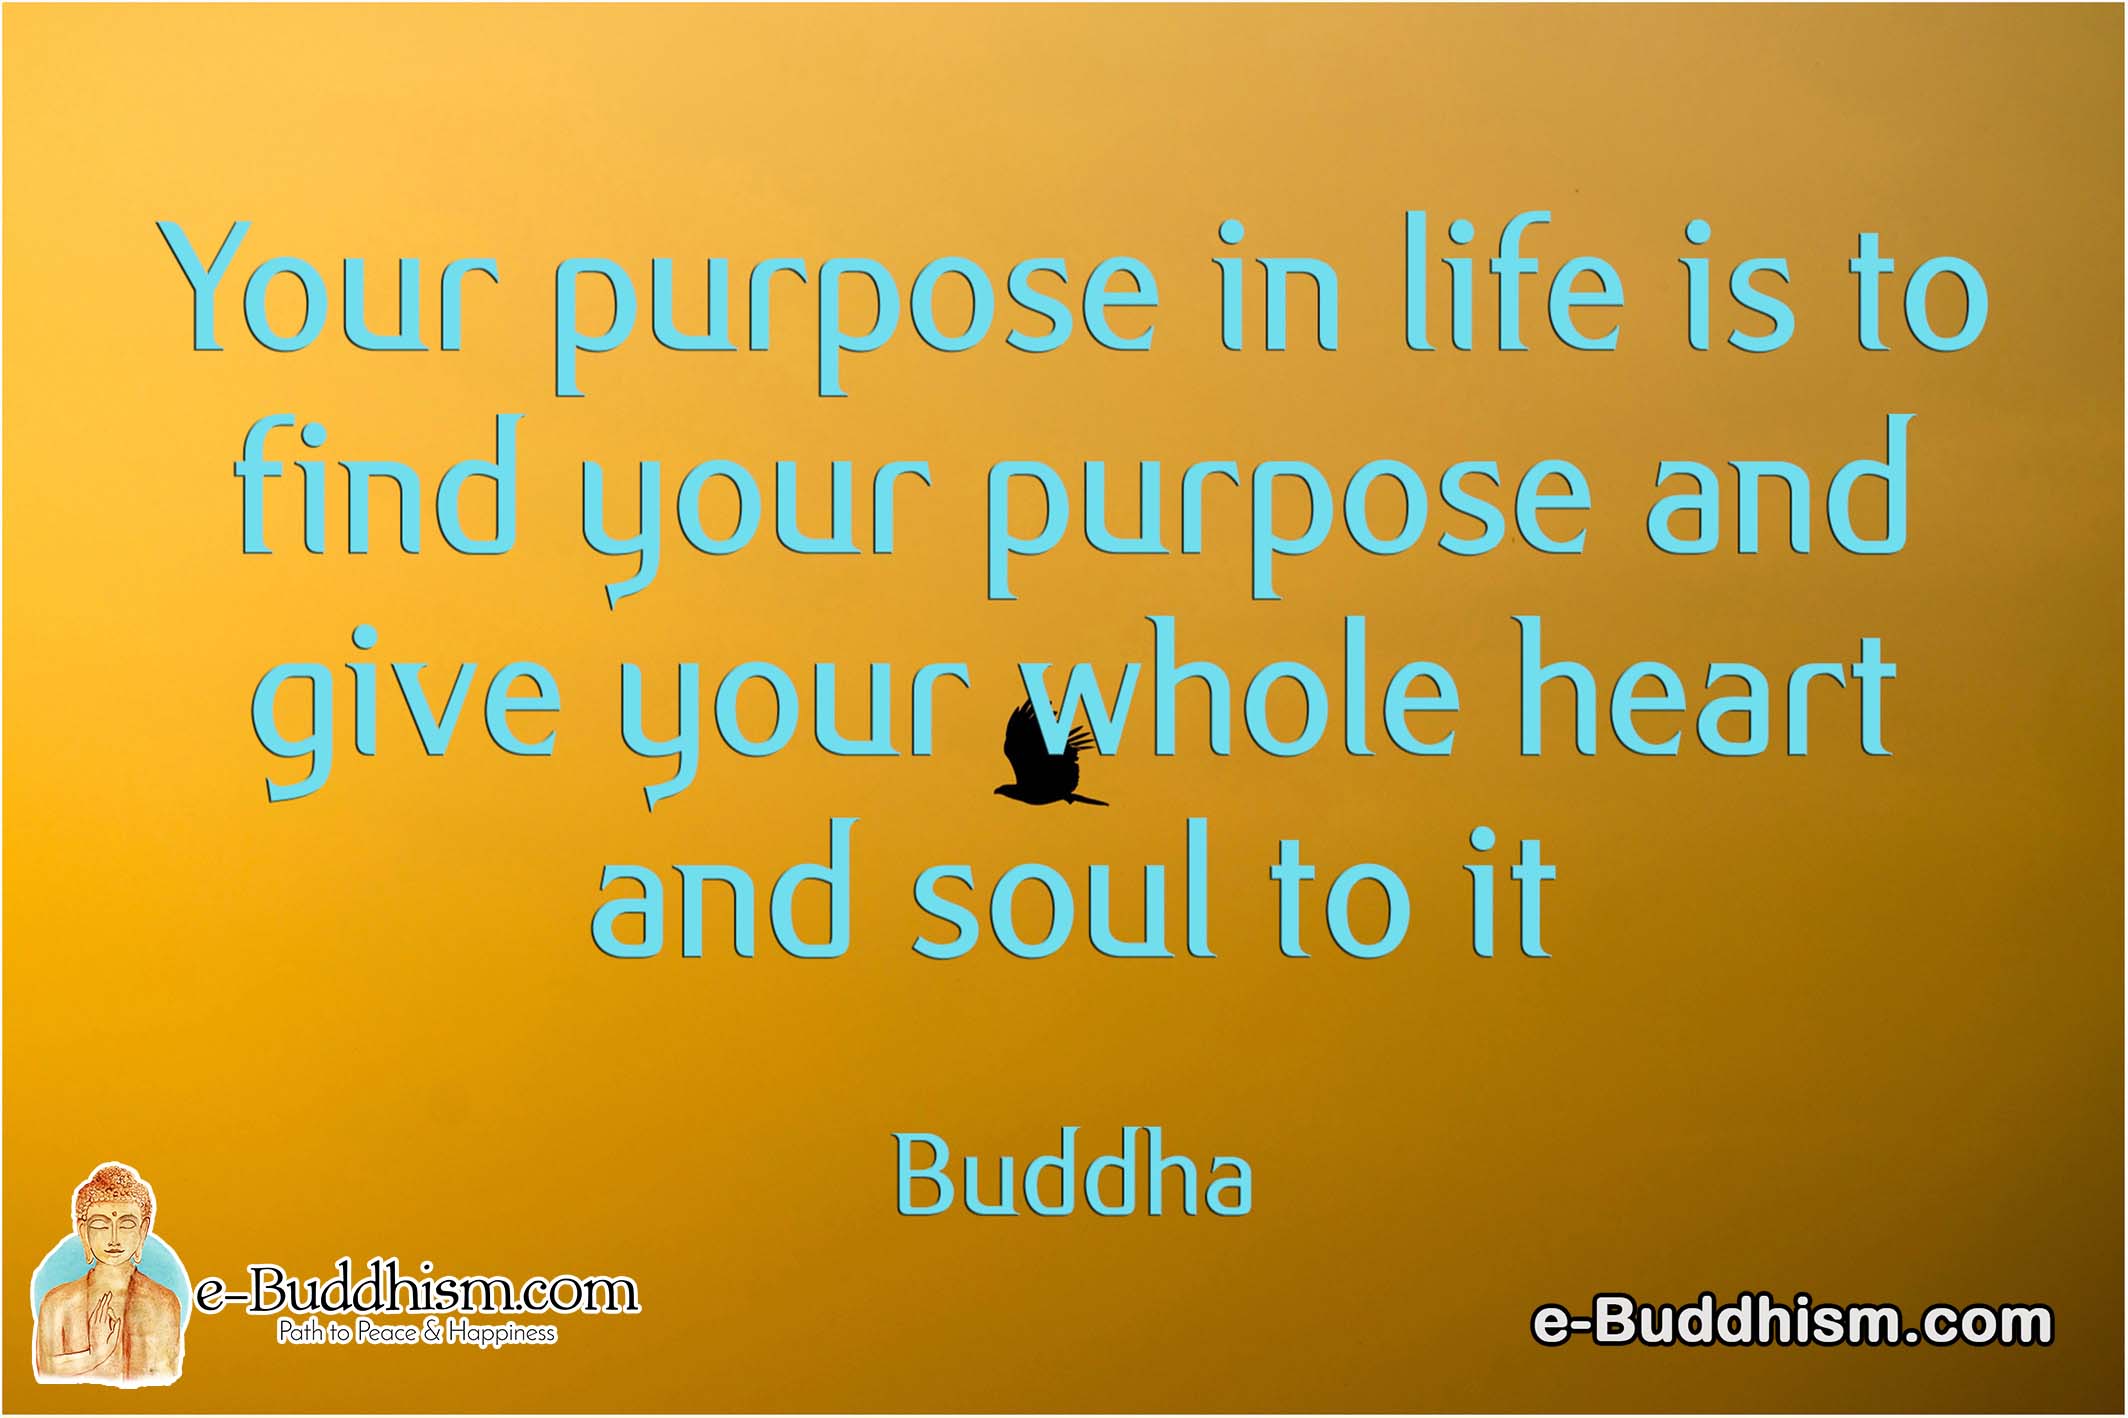 Your purpose in life is to find your purpose and give your whole heart and soul to it. -Buddha